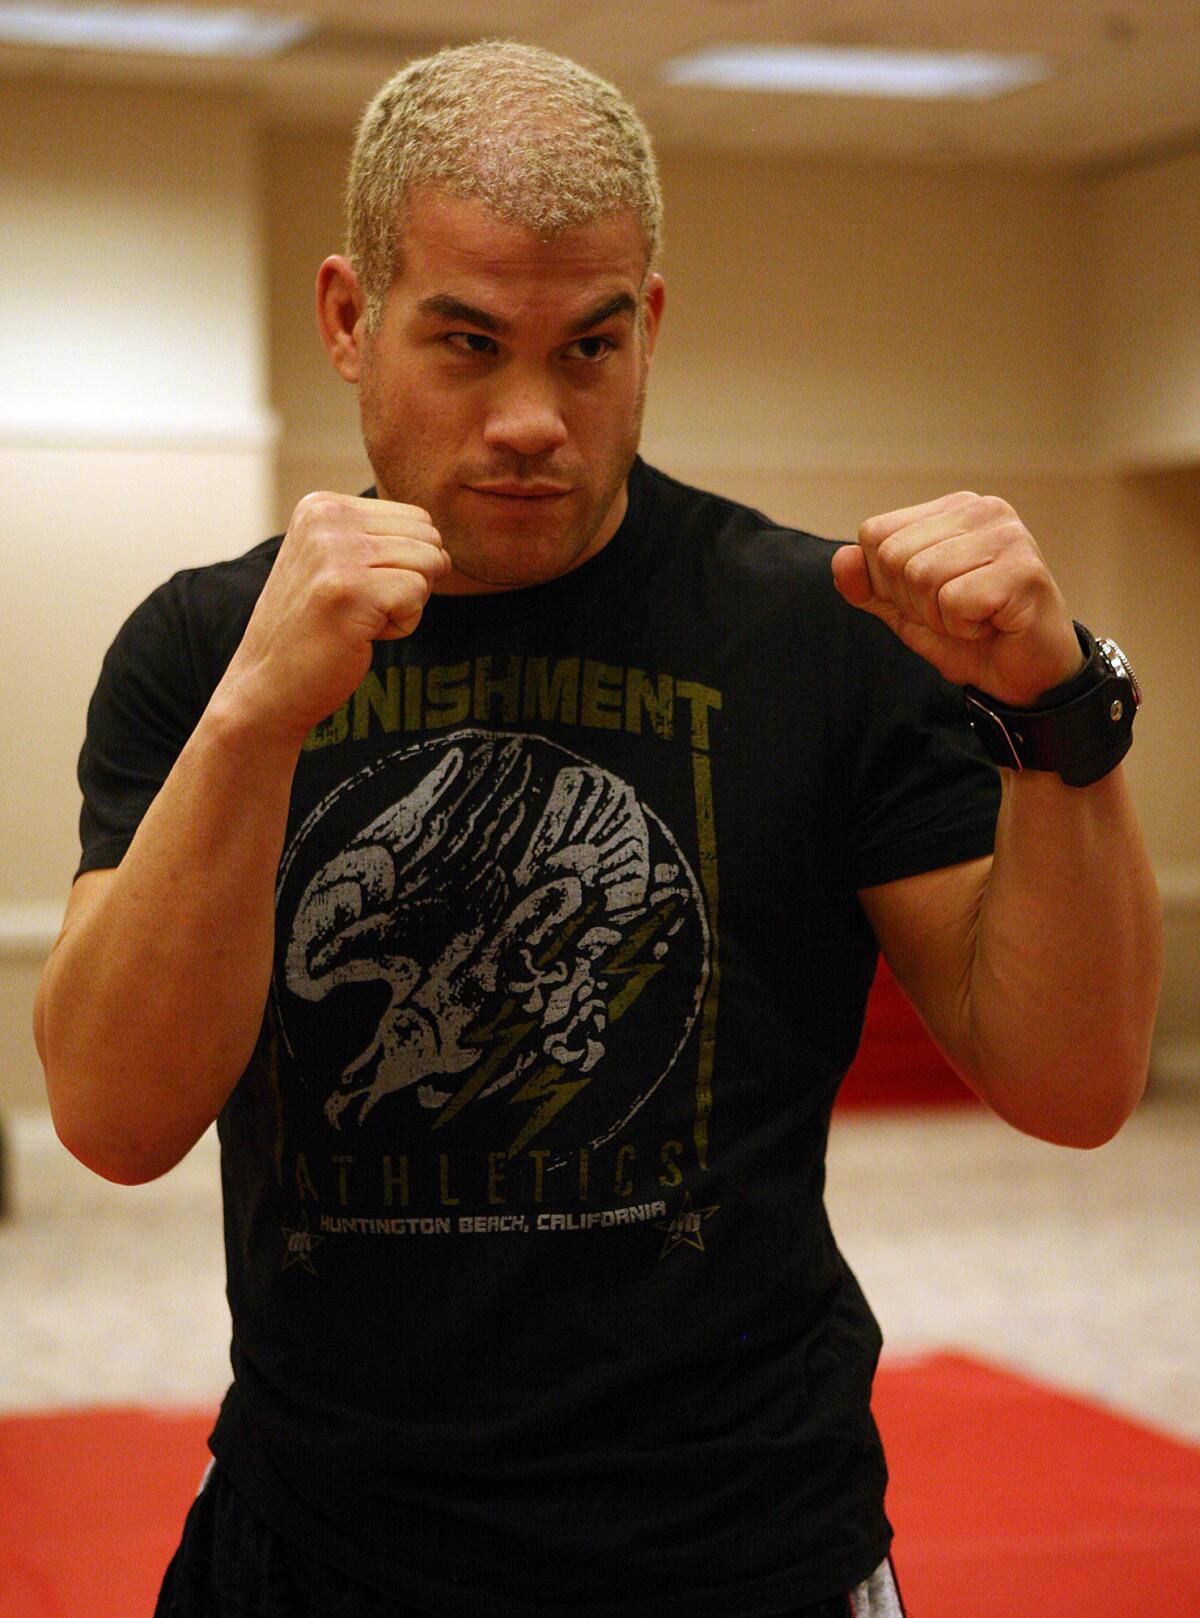 MMA fighter Tito Ortiz, seen here in 2006, was arrested Monday on suspicion of DUI after crashing his Porsche on the 405 Freeway.